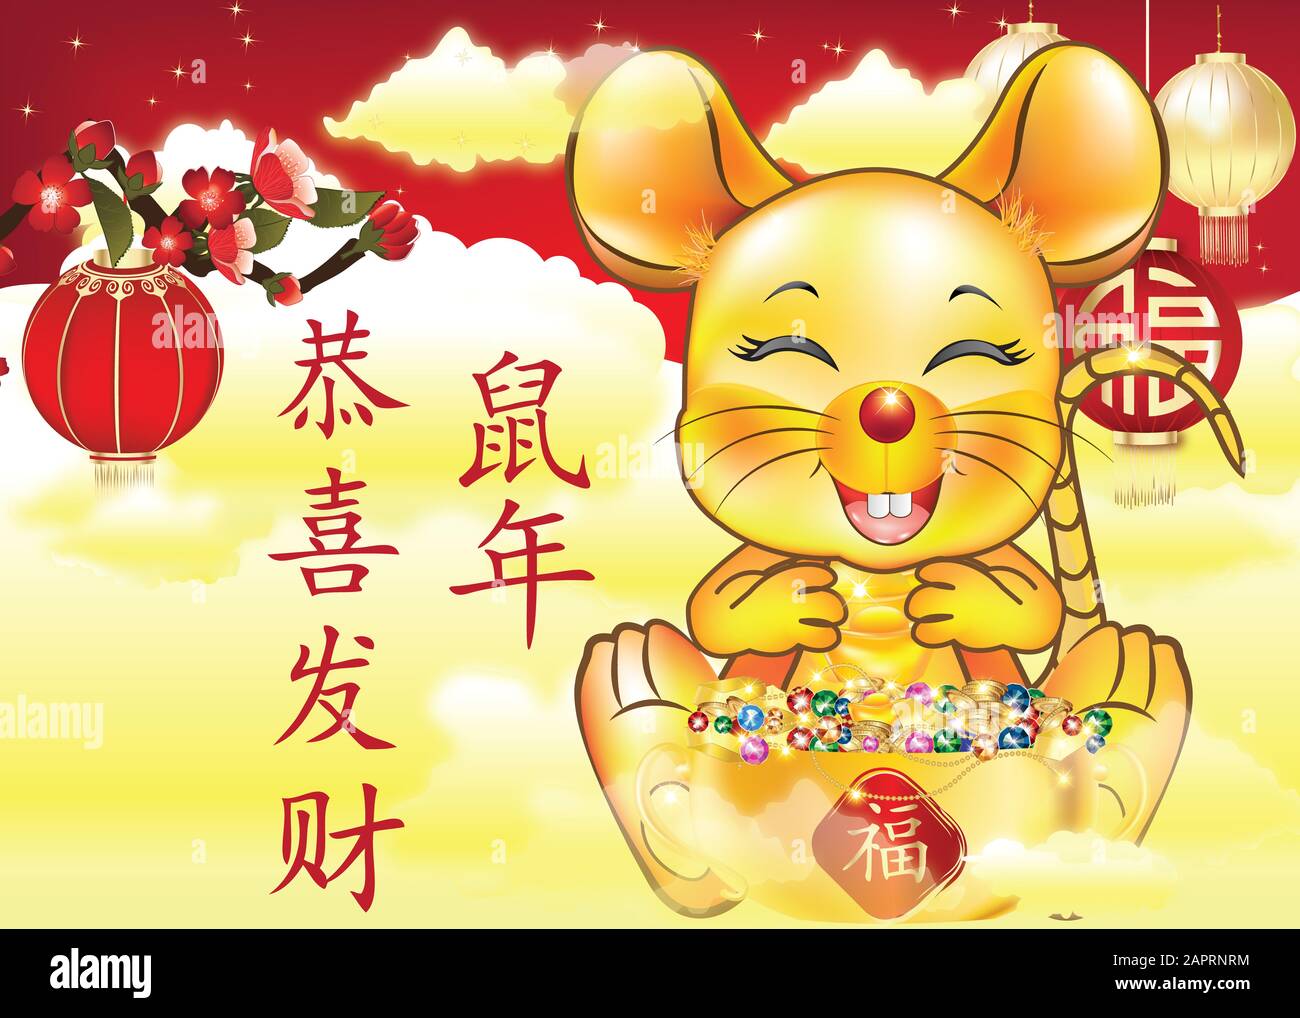 Red greeting card - Happy Chinese New Year of the Rat! Ideograms translation: Congratulations and make fortune. Year of the Rat. Blessings / good luck Stock Photo